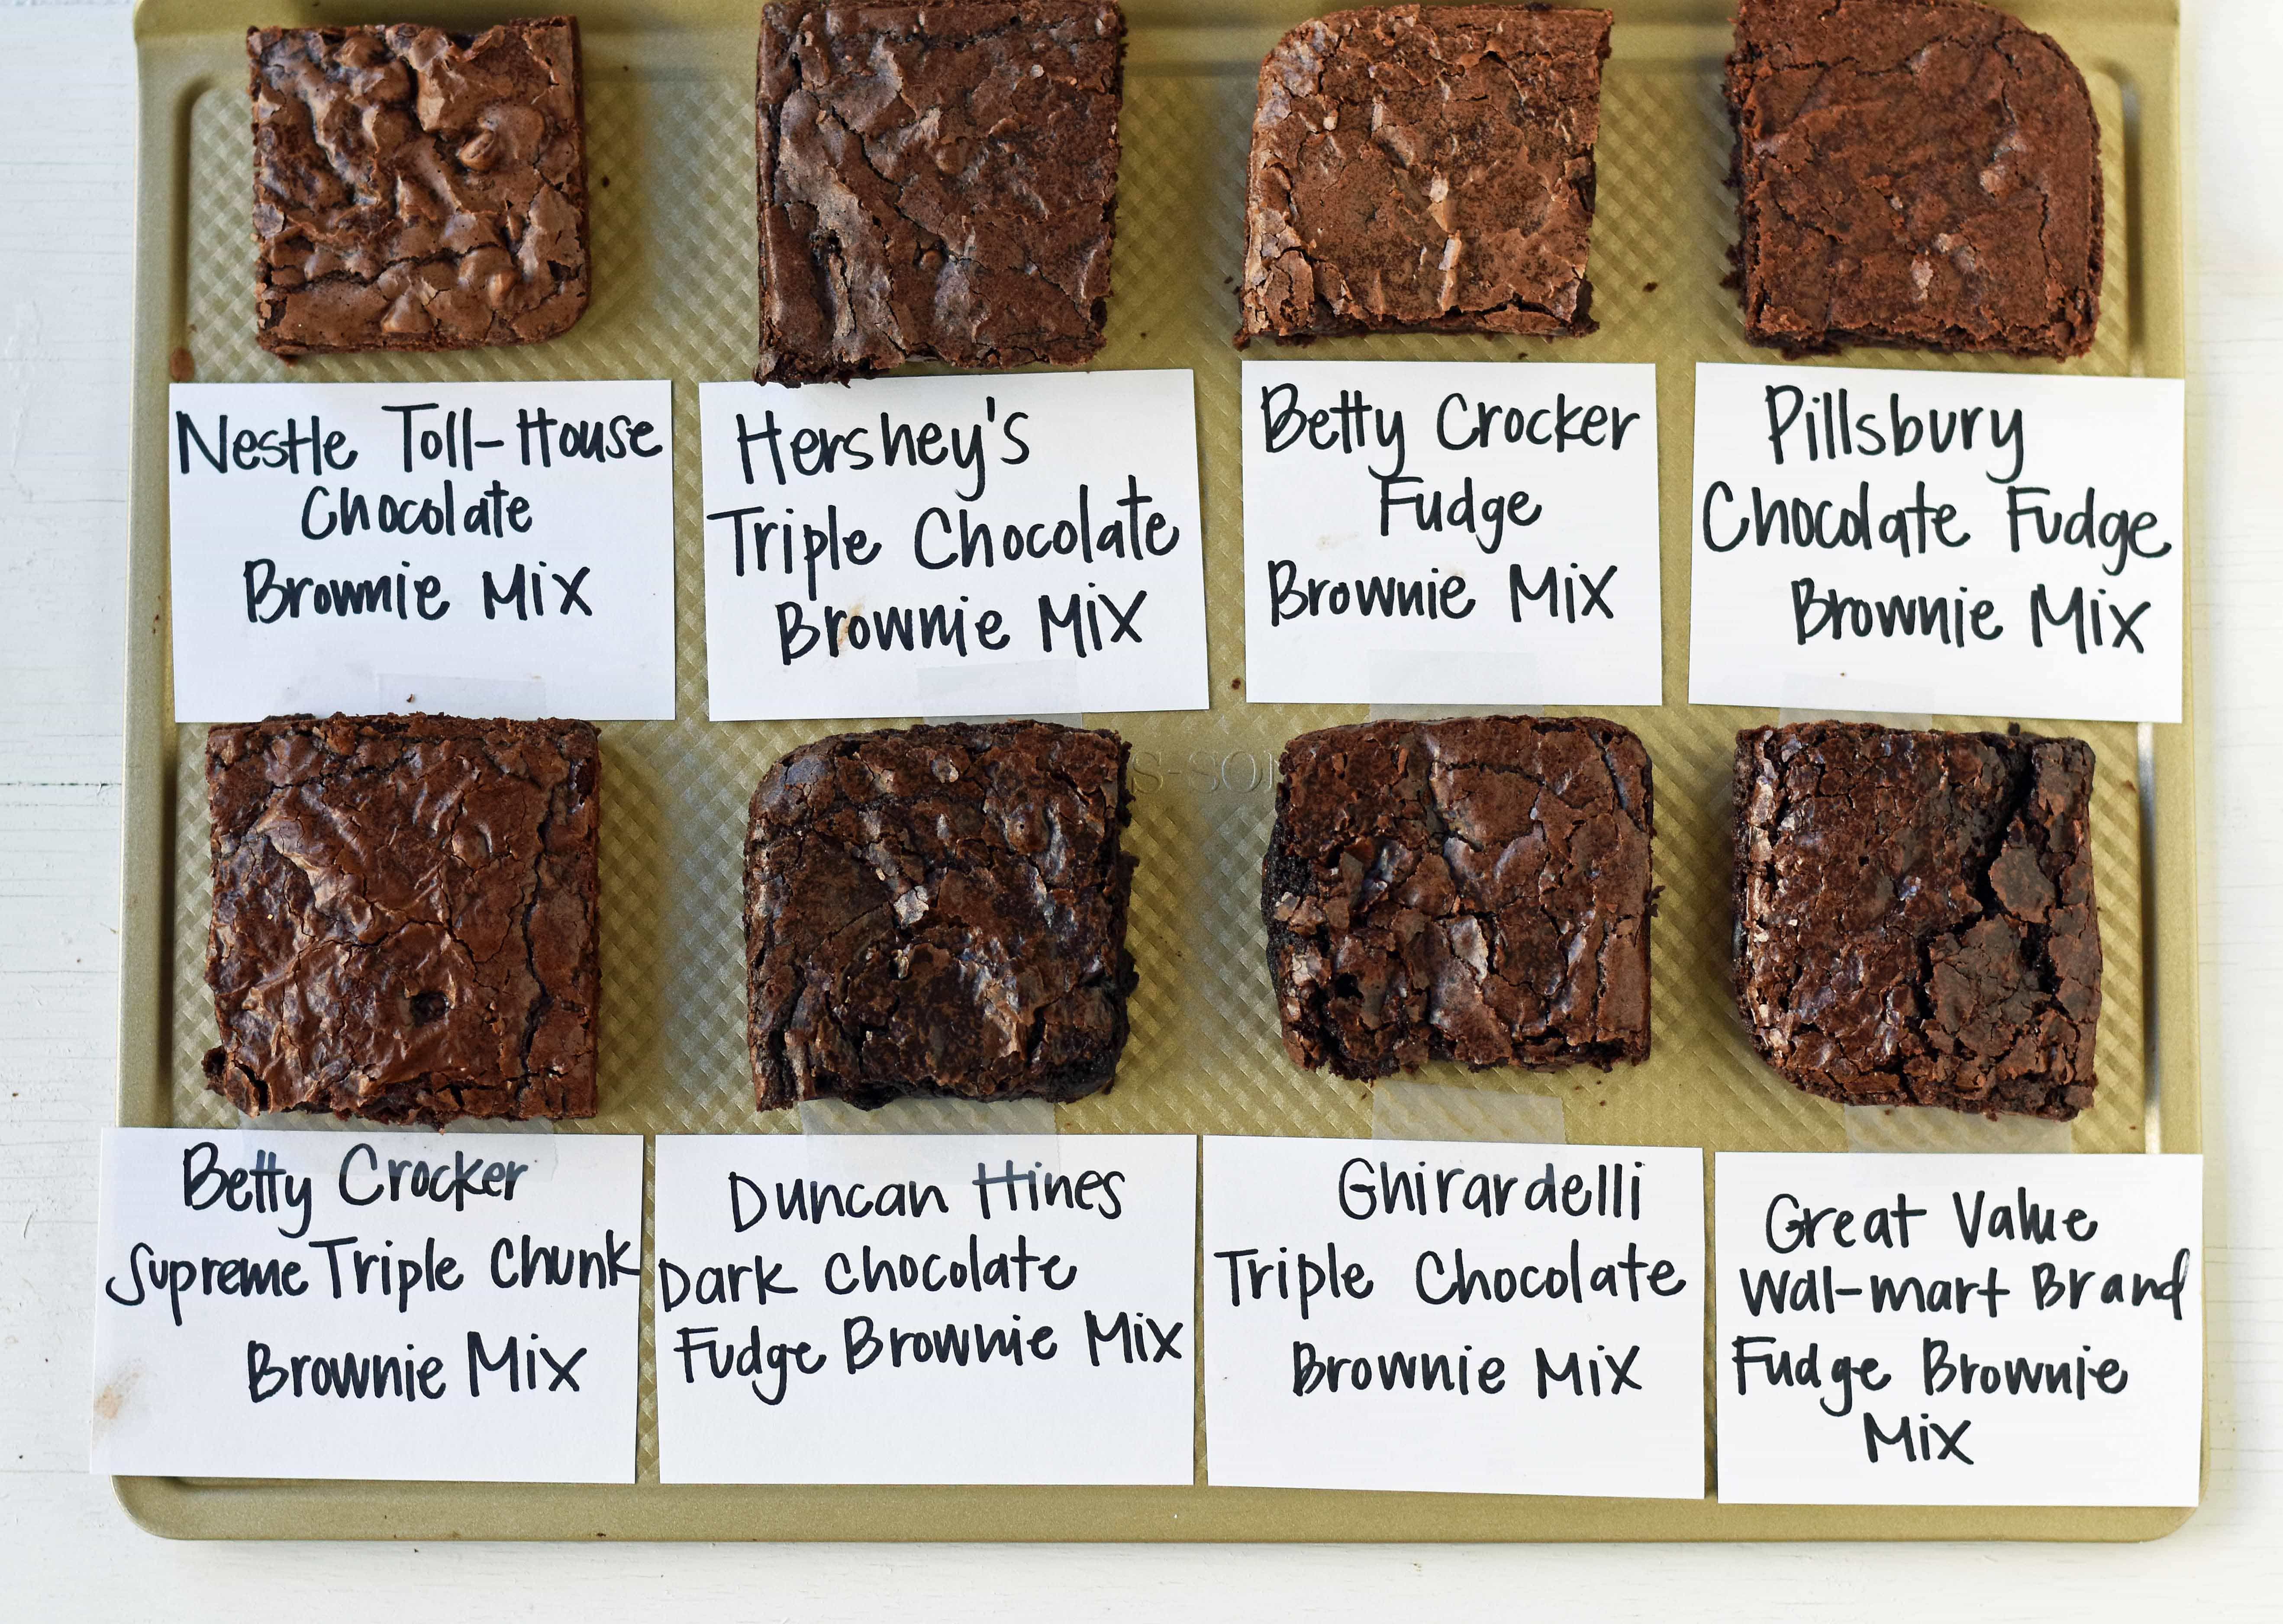 The BEST Brownie Taste Test. Reviews of the best boxed brownies in the grocery store. How to find the most popular brownie mixes. The ultimate boxed brownie mix taste test. Find out which chocolate brownie mix was the taste test winner! www.modernhoney.com